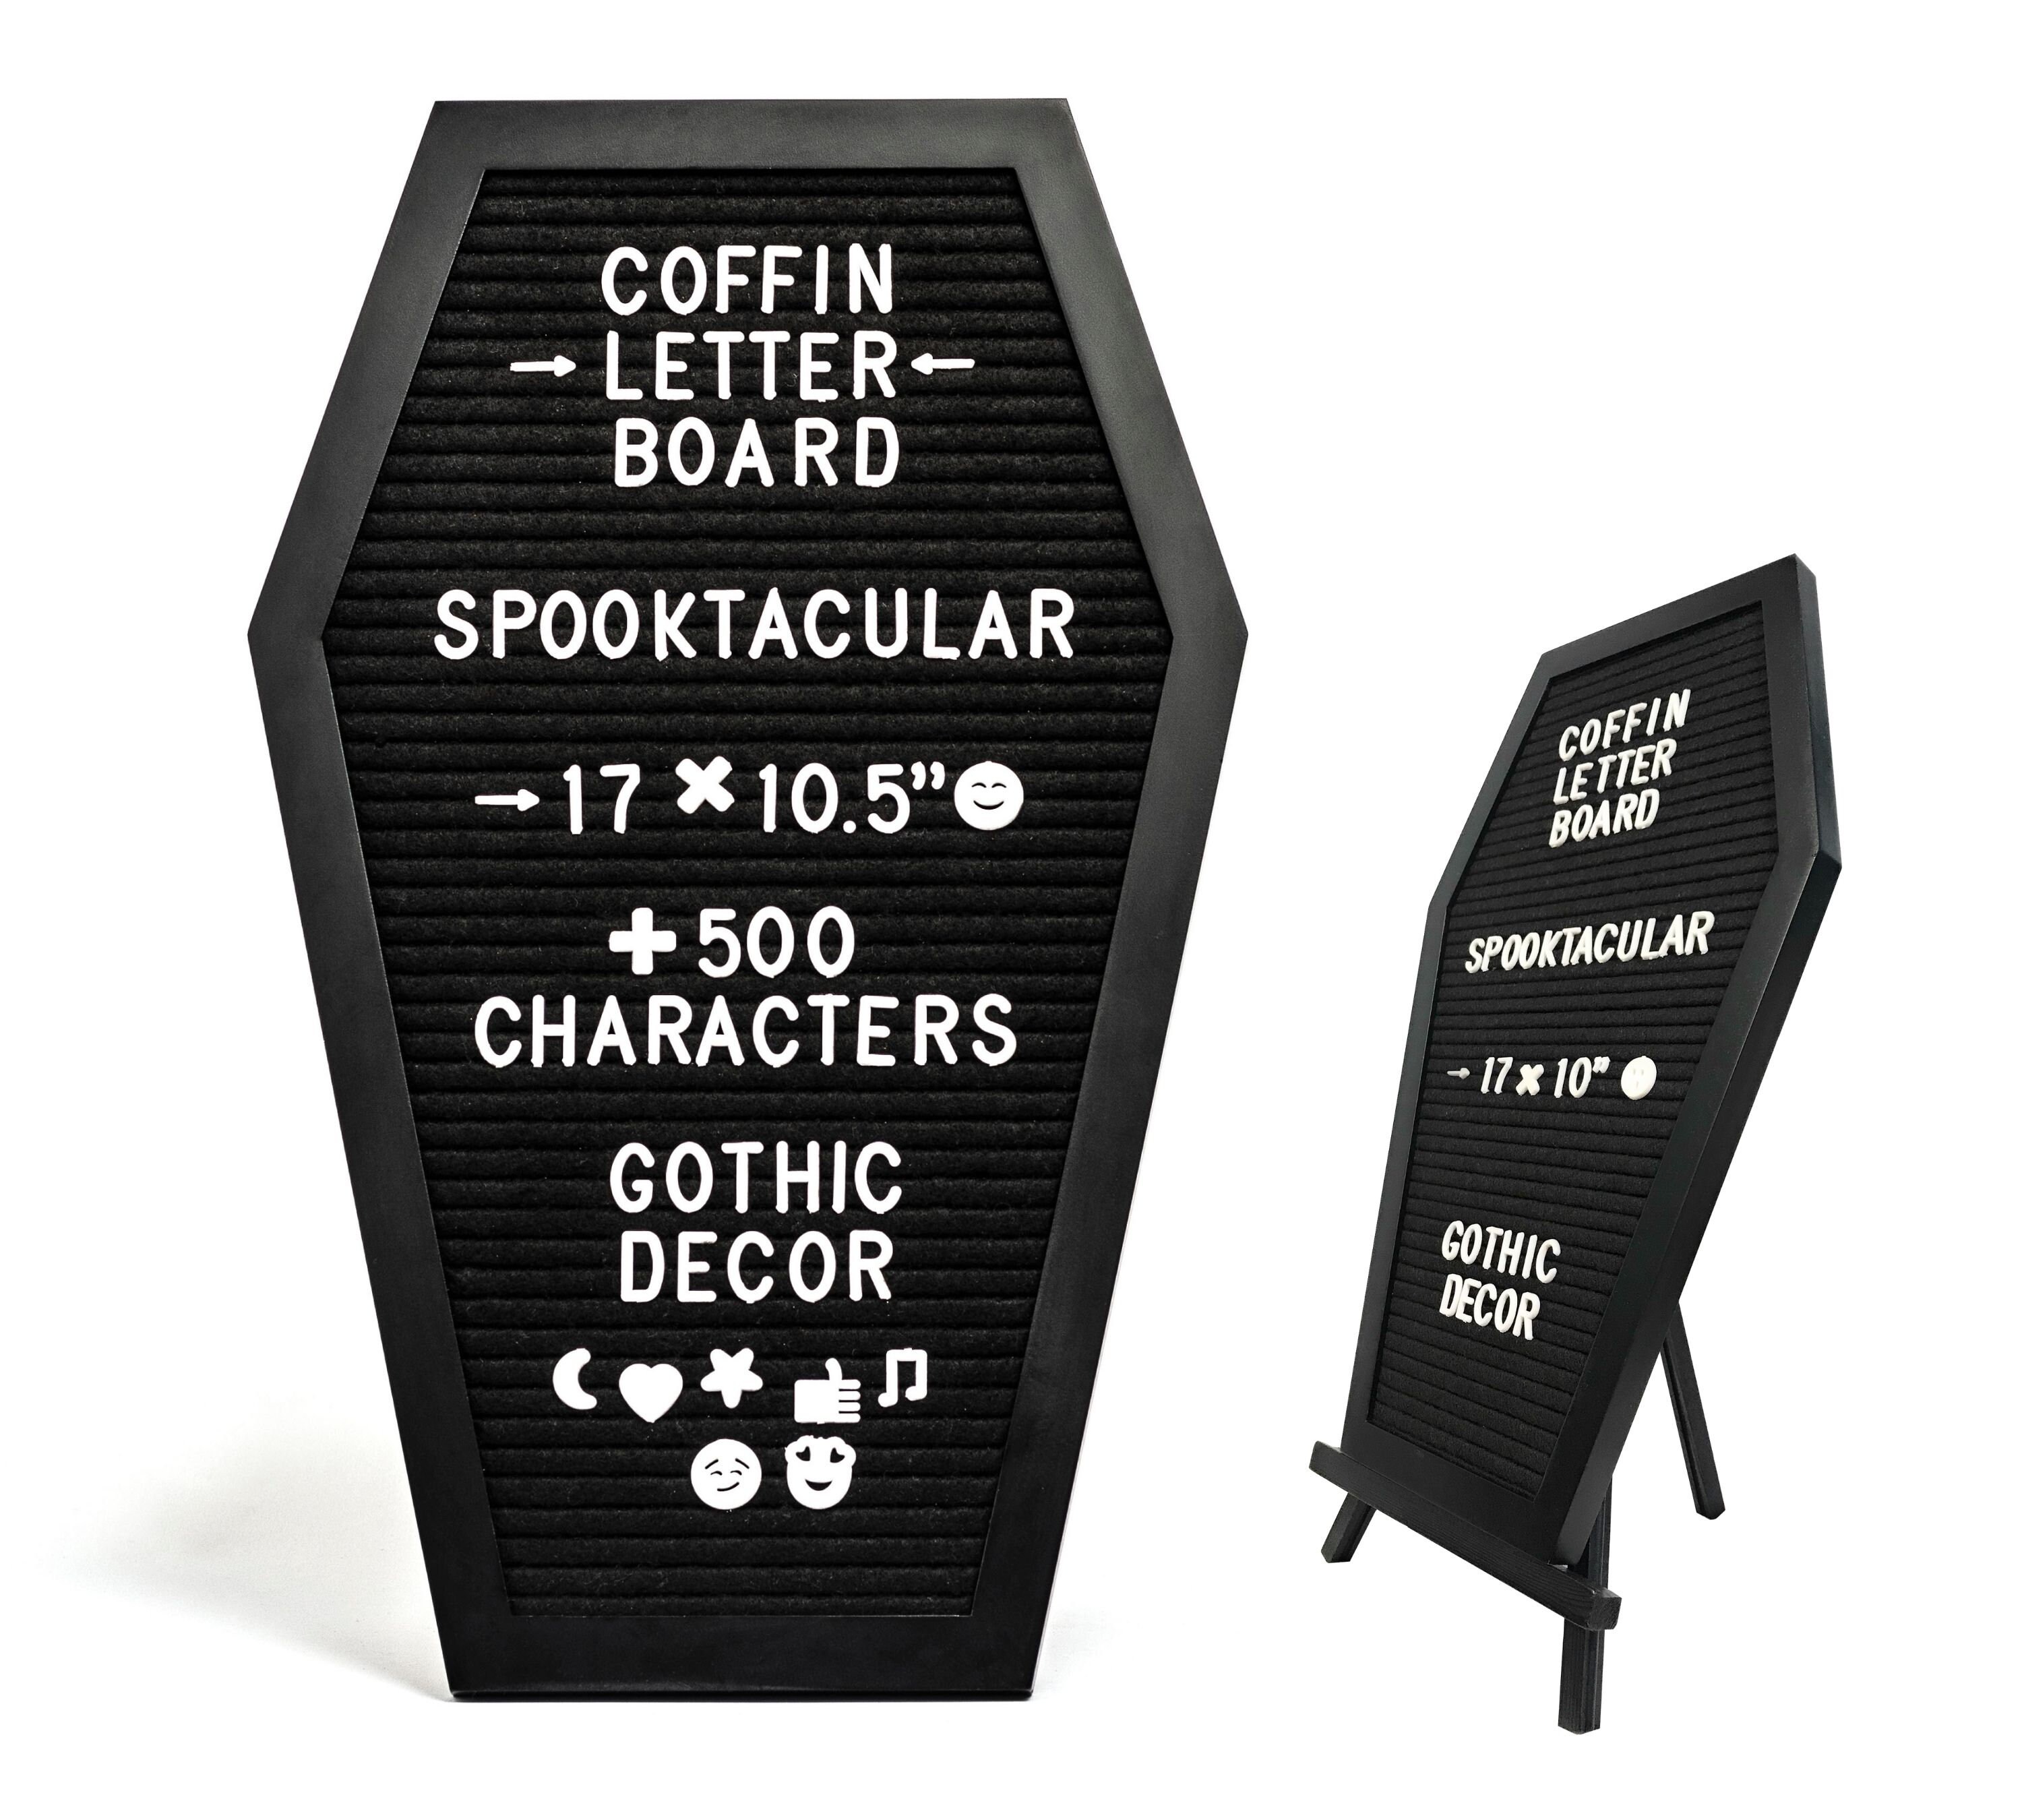 2 Black, 1 Orange Felt 8”x5” Mini Coffin Vintage Letter Board 3-Pack Small Spooky Changeable Horror Gothic Creepy Message Boards with White and Script Characters by Felt Creative Home Goods 